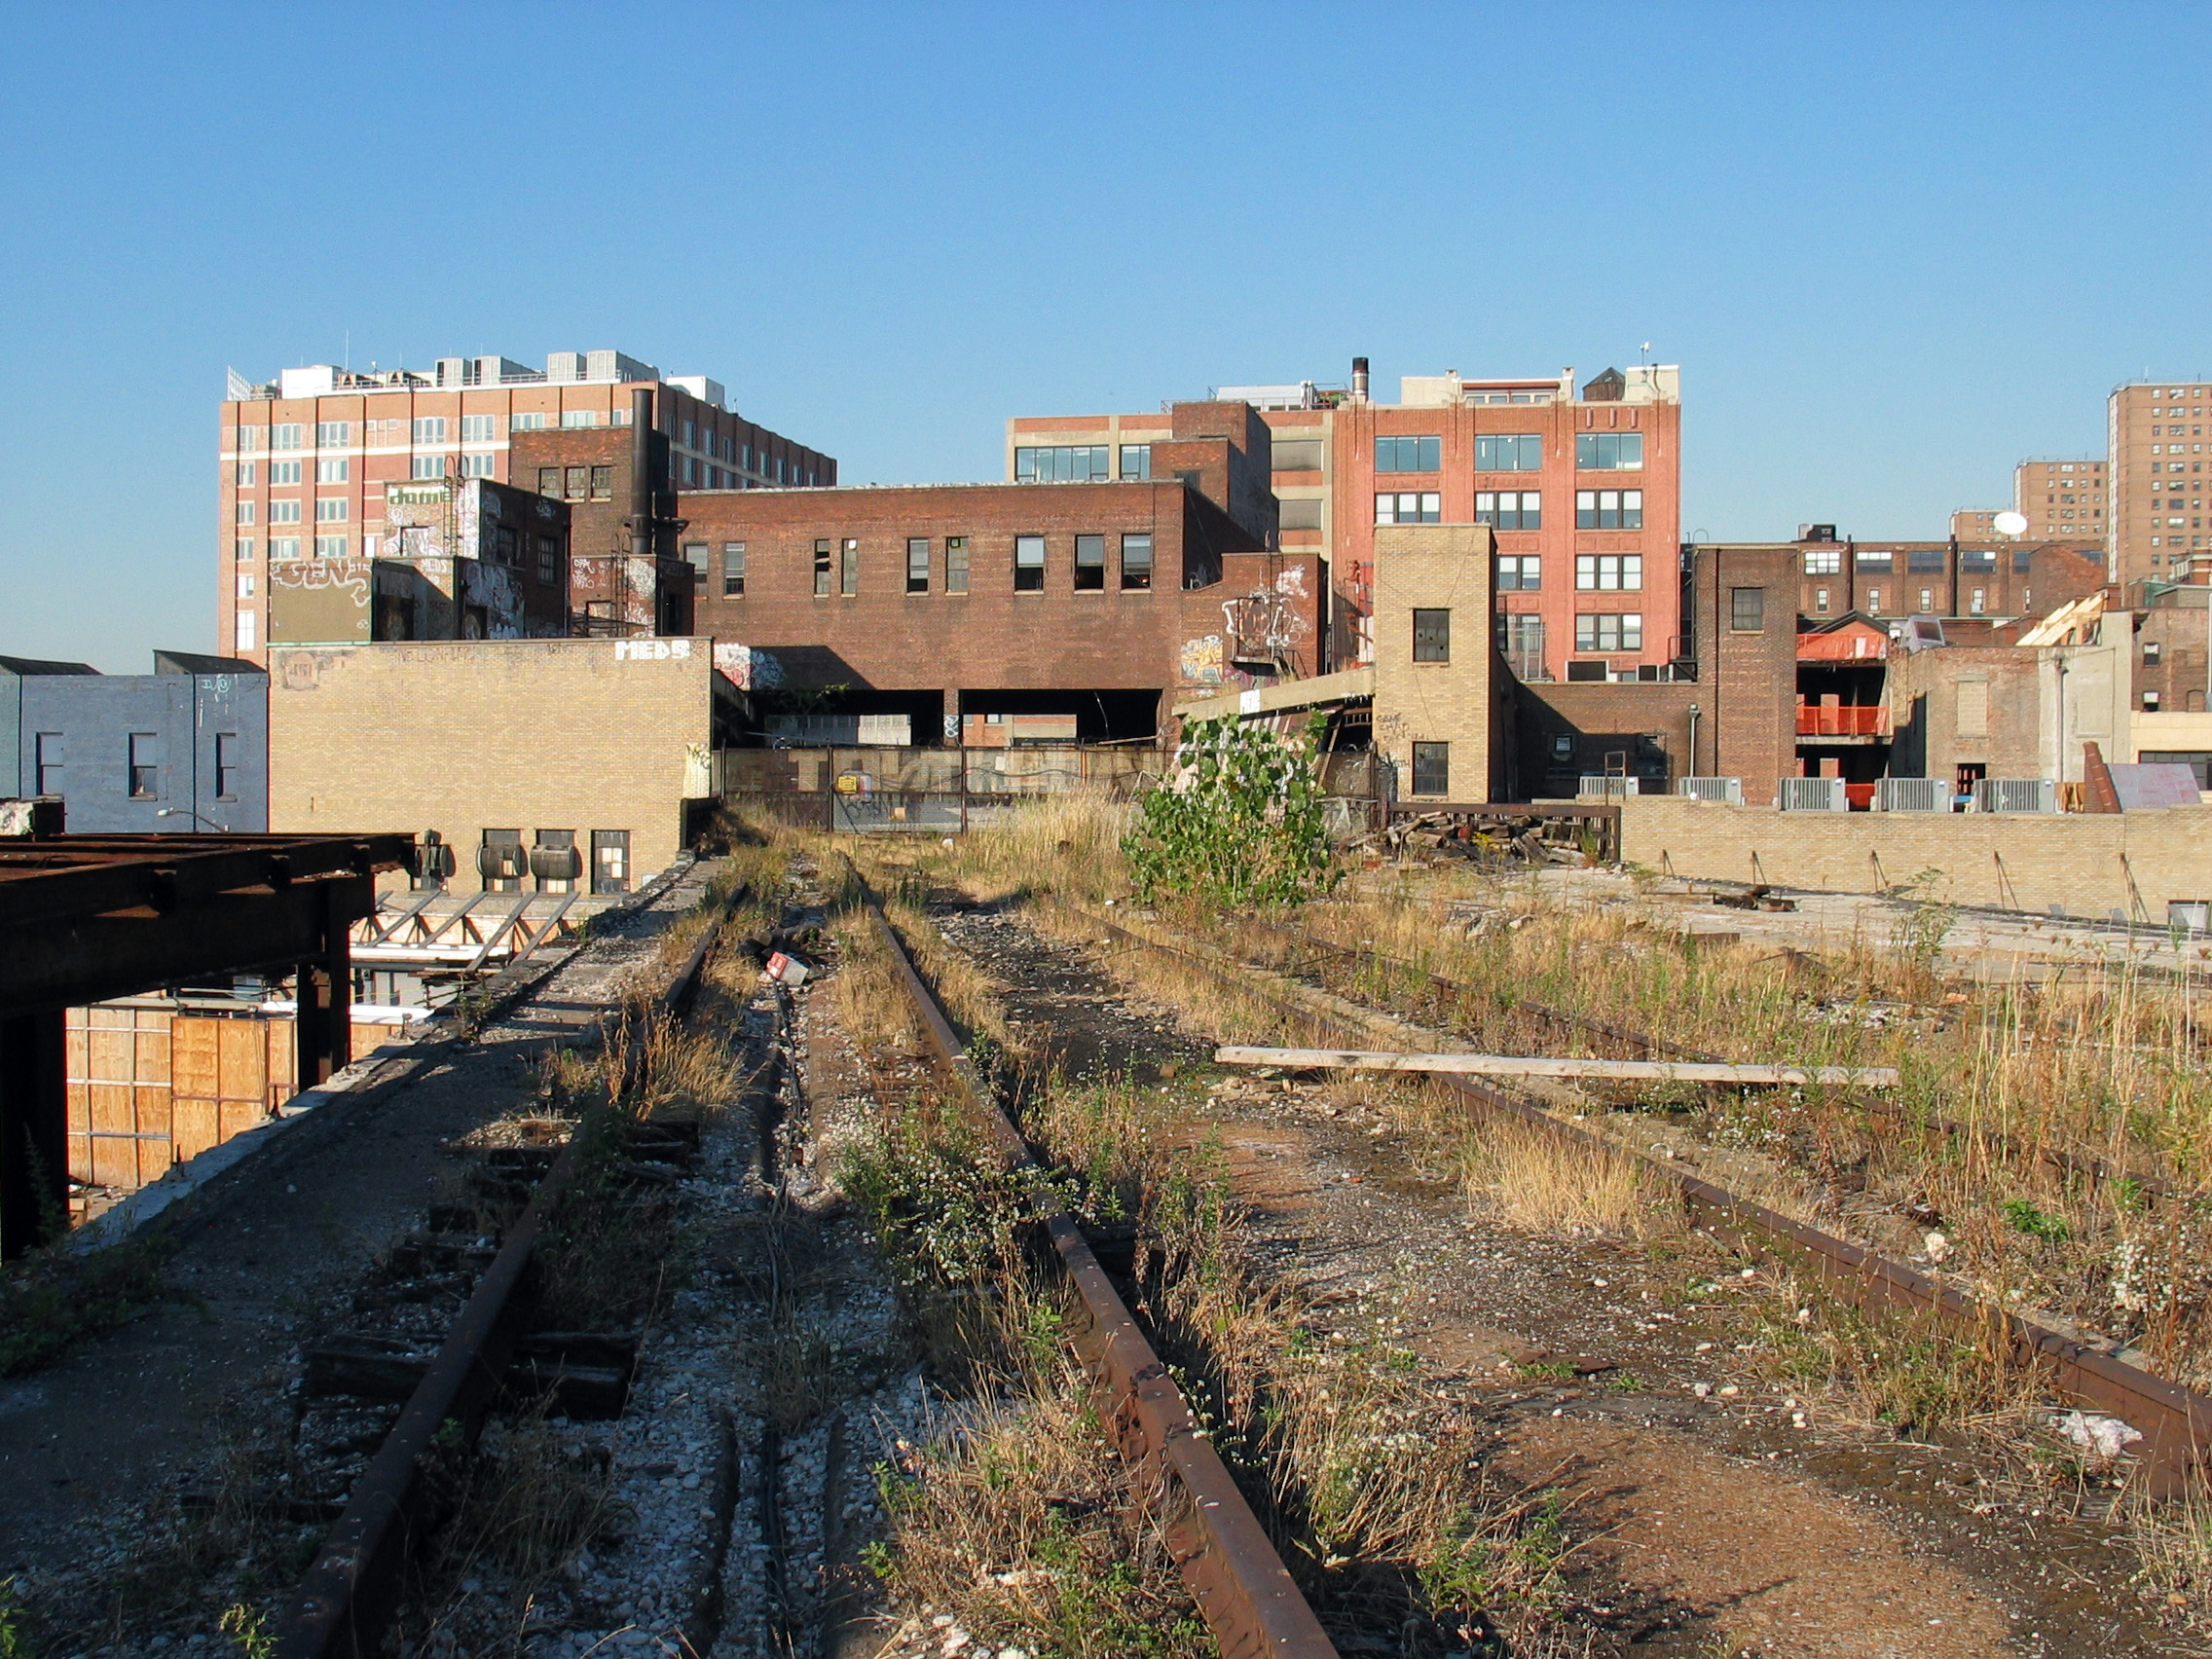 Image of highline before redesign